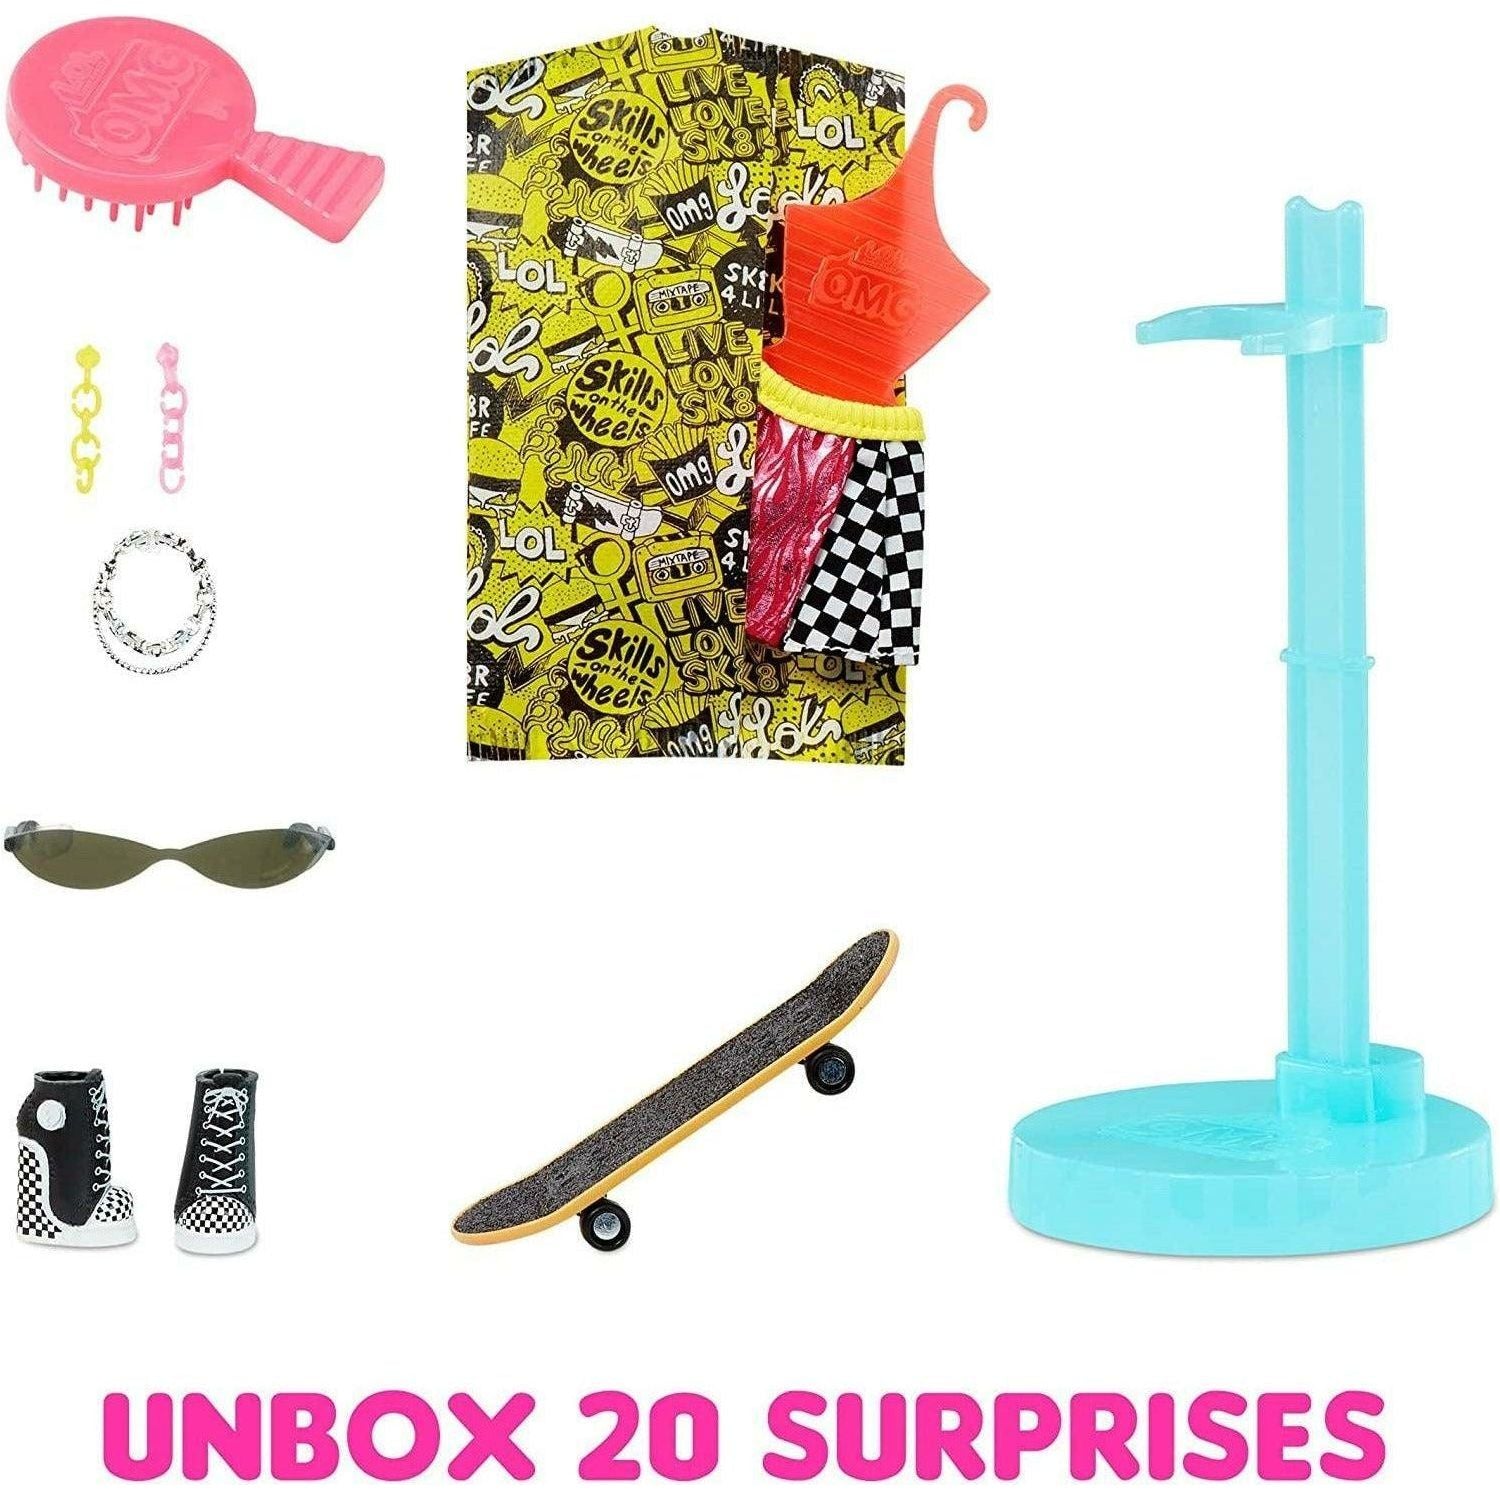 L.O.L Surprise O.M.G Skatepark Q.T. Fashion Doll with 20 Surprises - BumbleToys - 5-7 Years, Dolls, Fashion Dolls & Accessories, Girls, L.O.L, OXE, Pre-Order